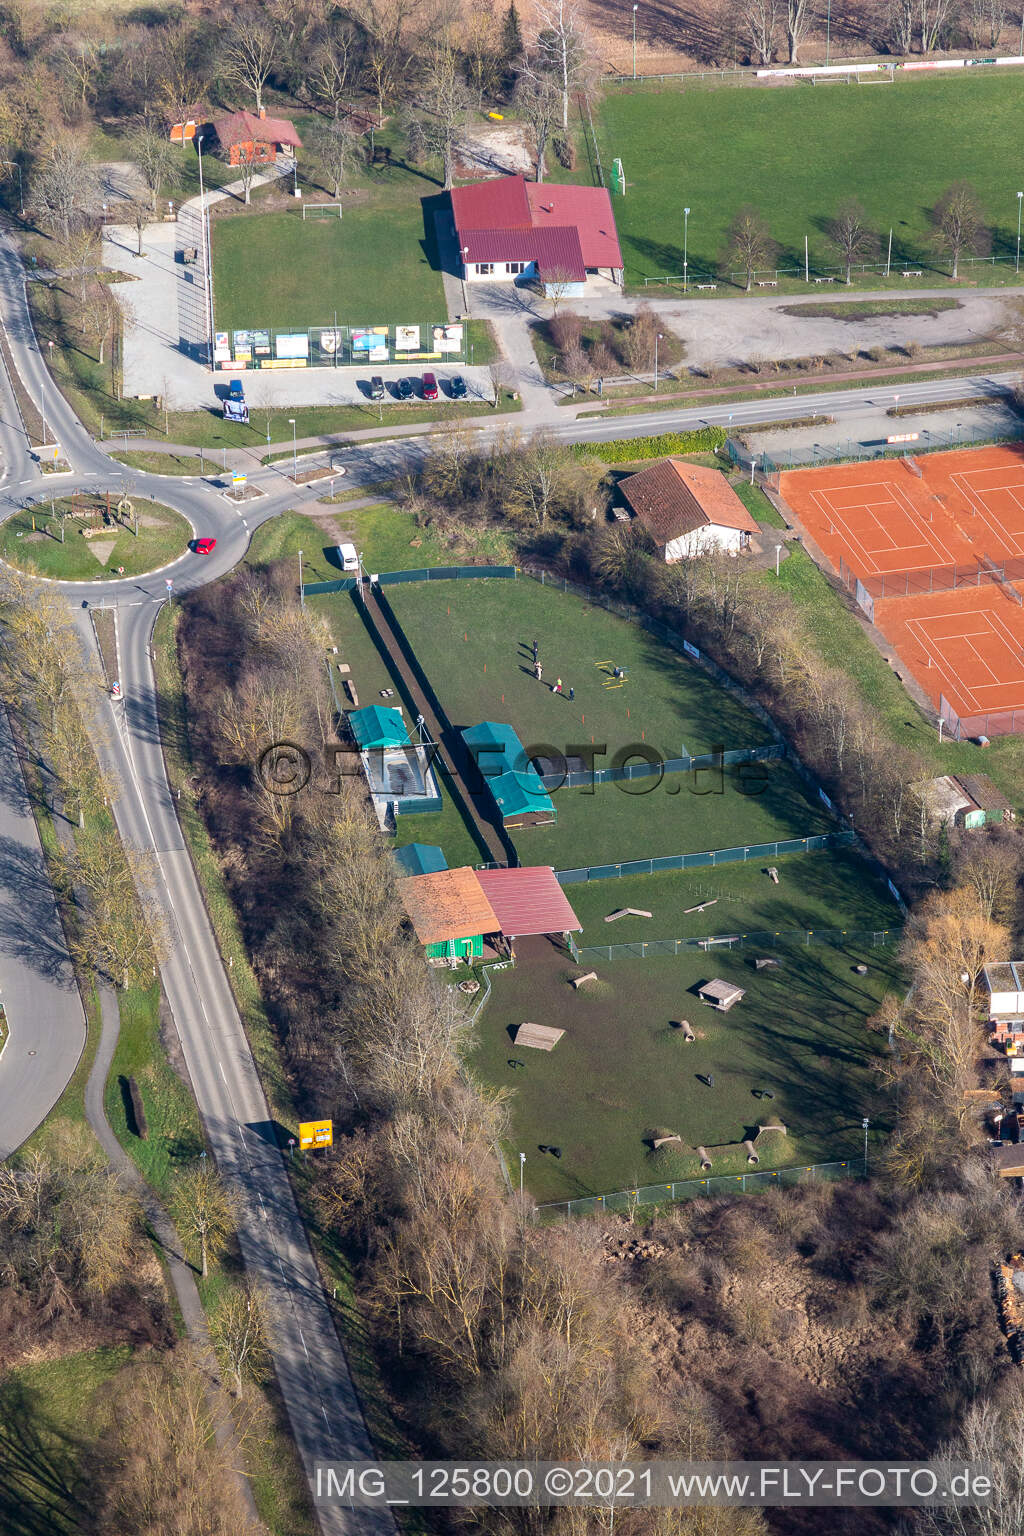 Tennis and dog sports club in Rohrbach in the state Rhineland-Palatinate, Germany